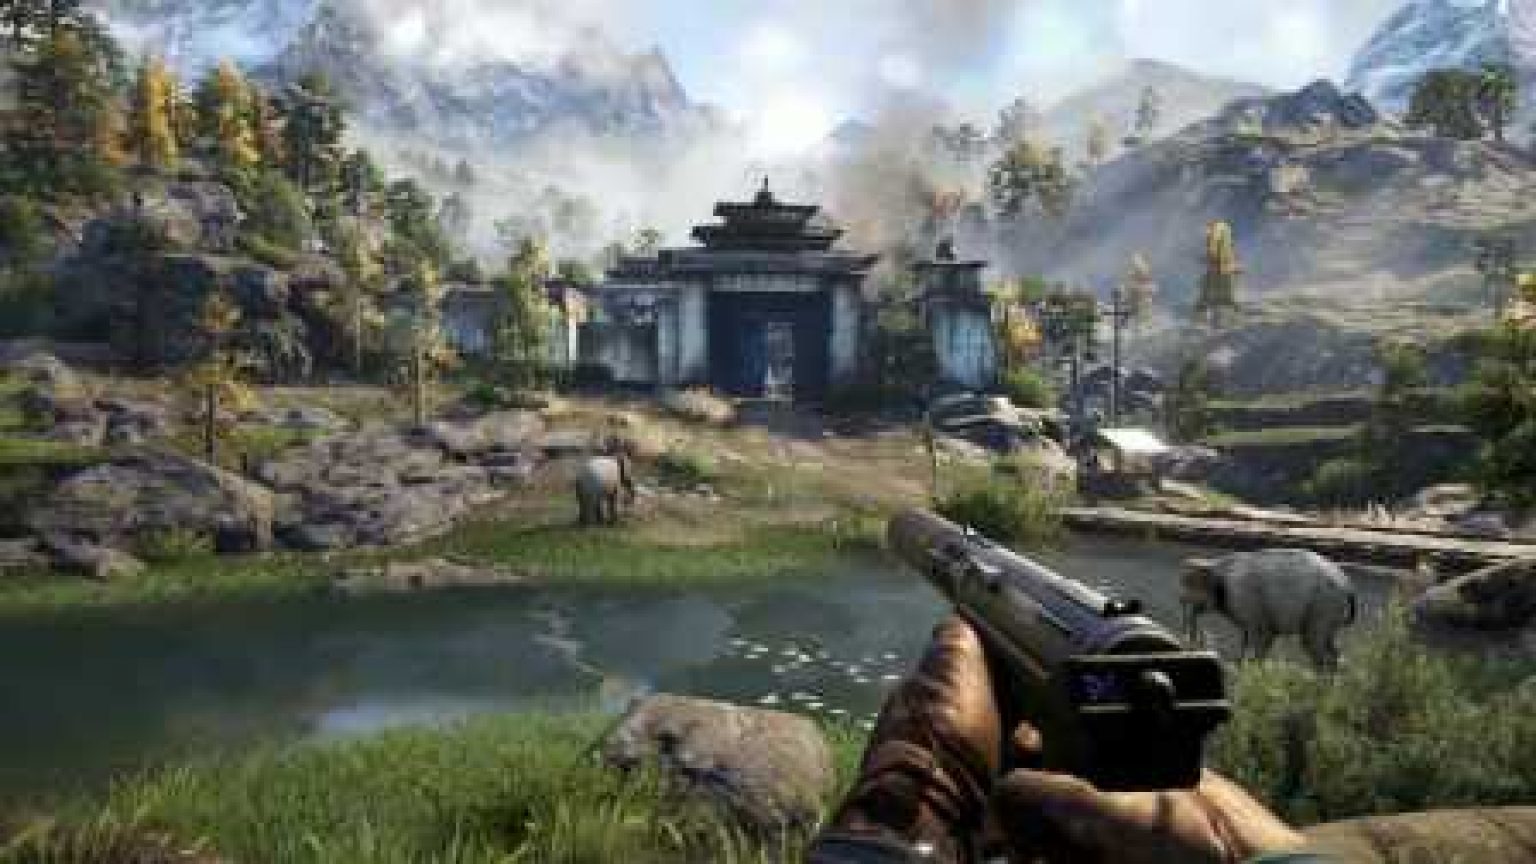 far cry 4 free download full version pc game compressed